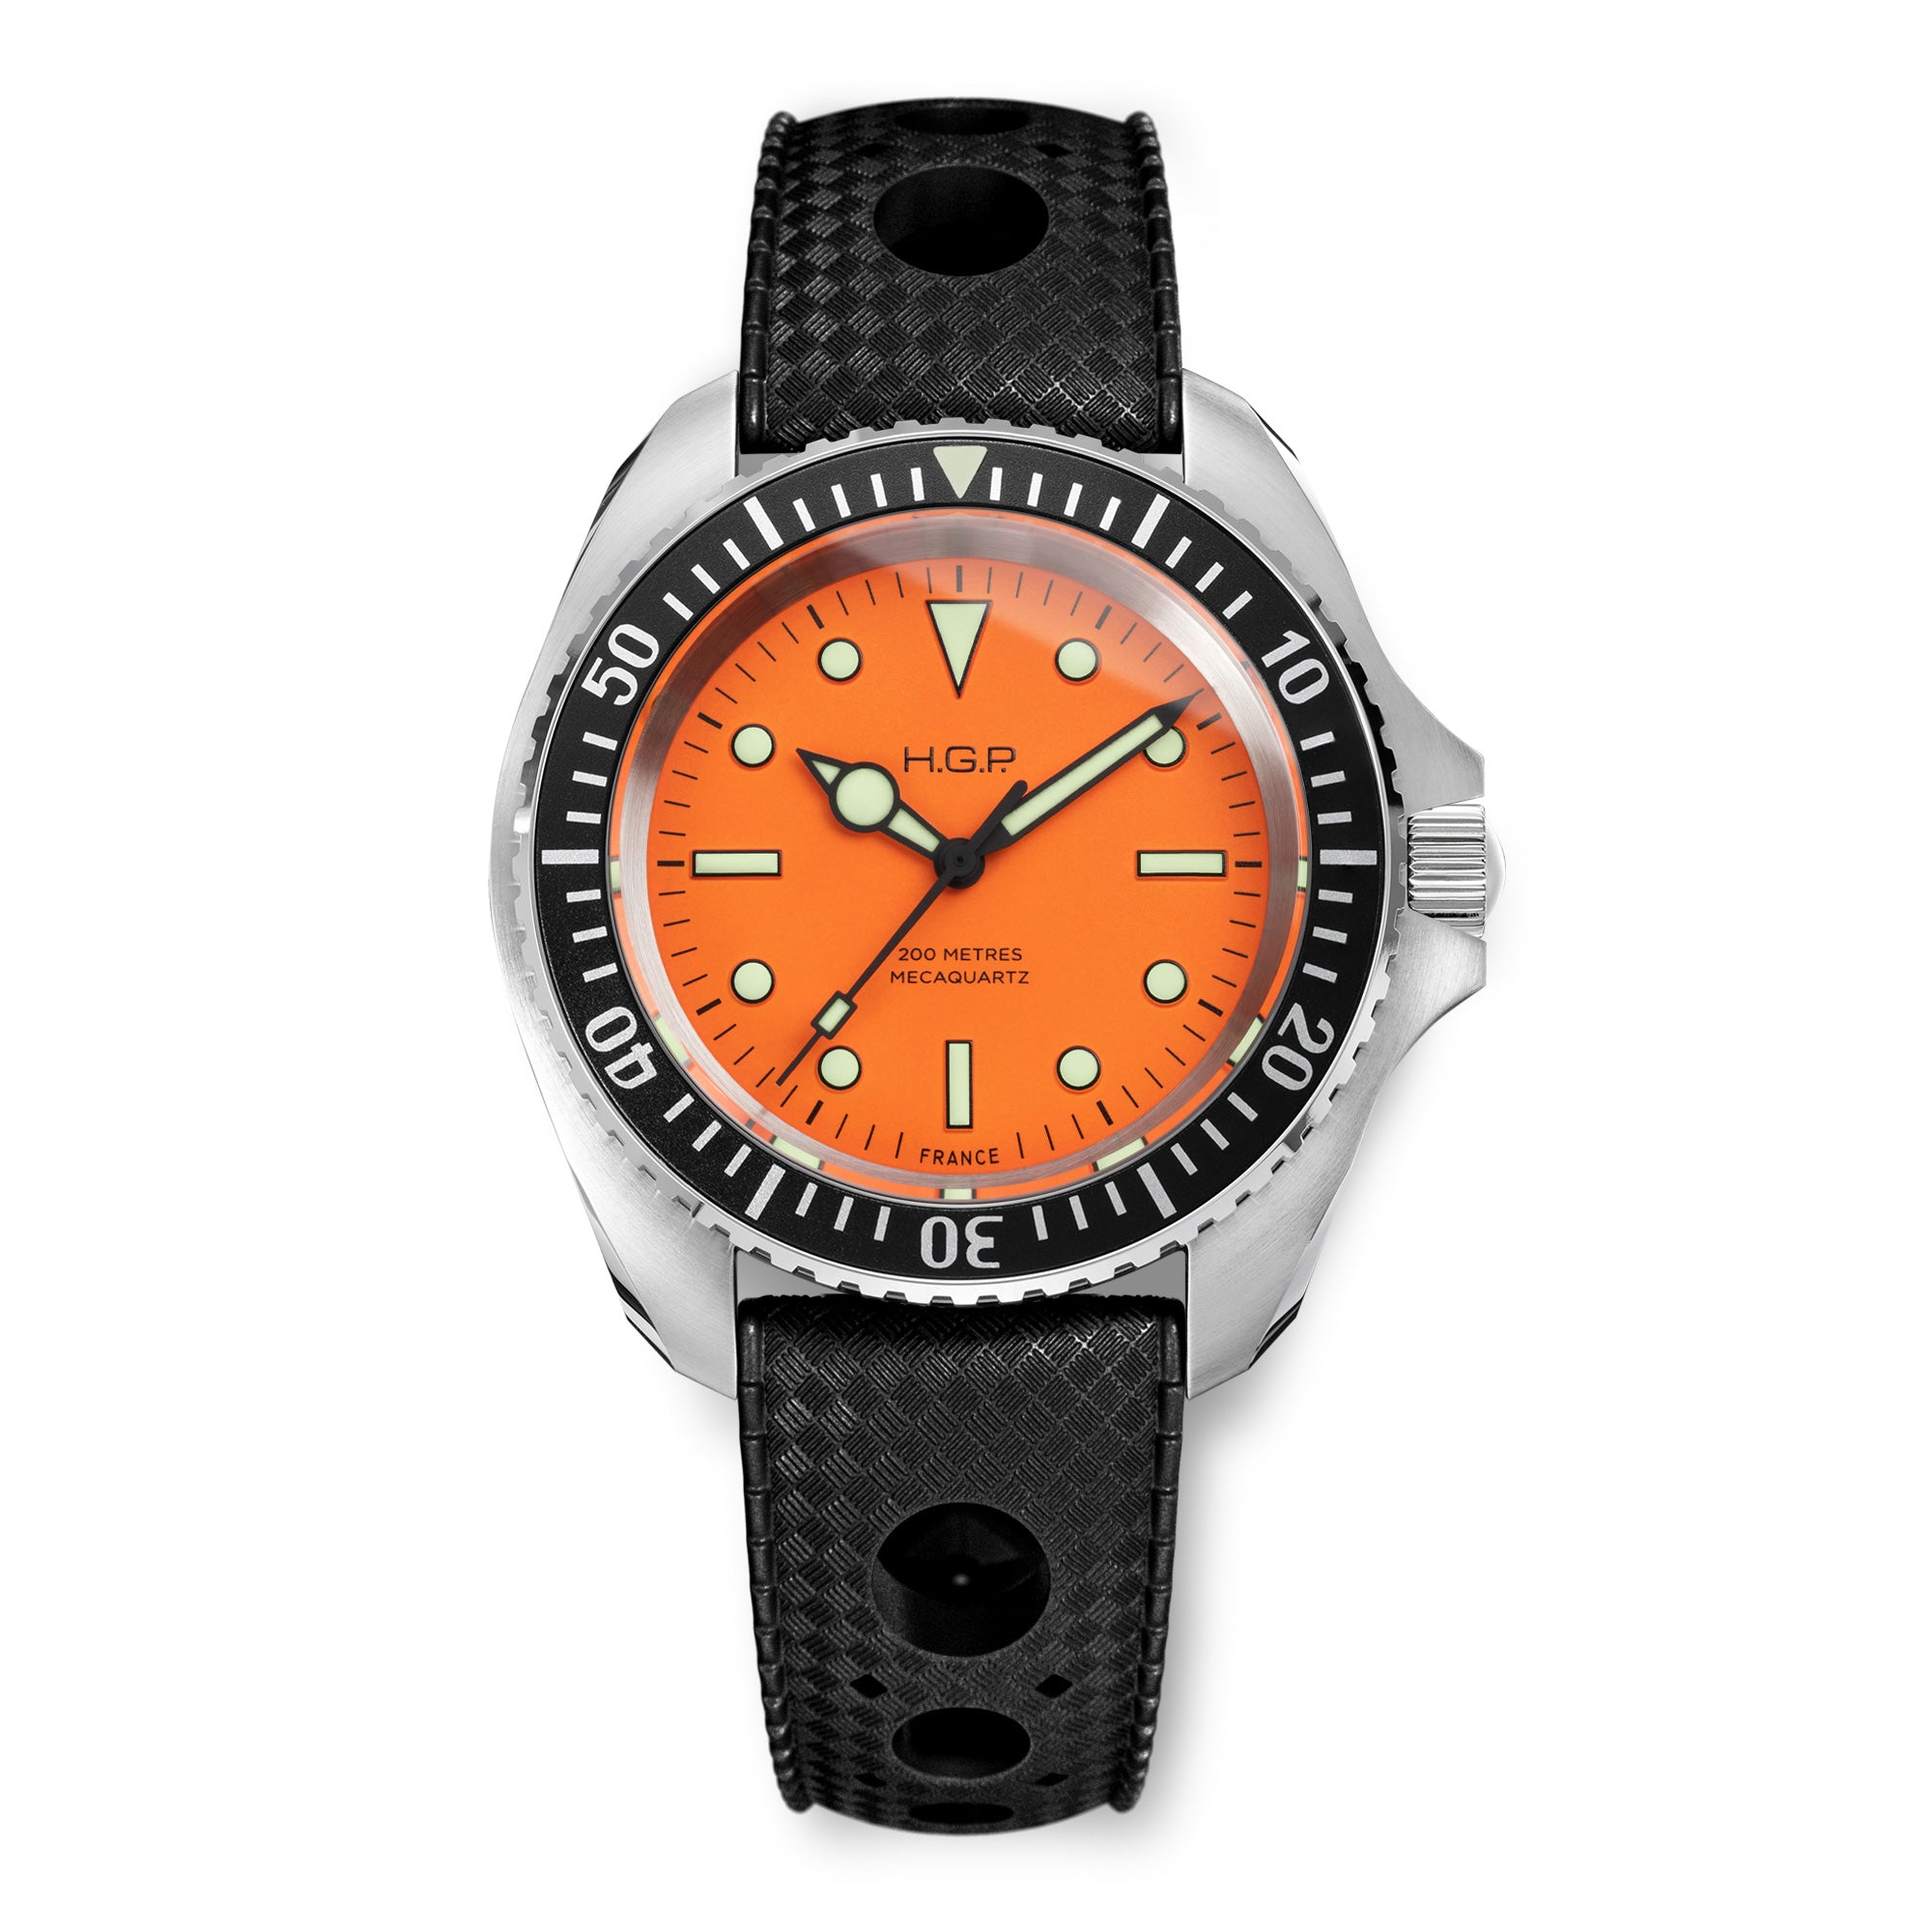 www.hgp-watches.com